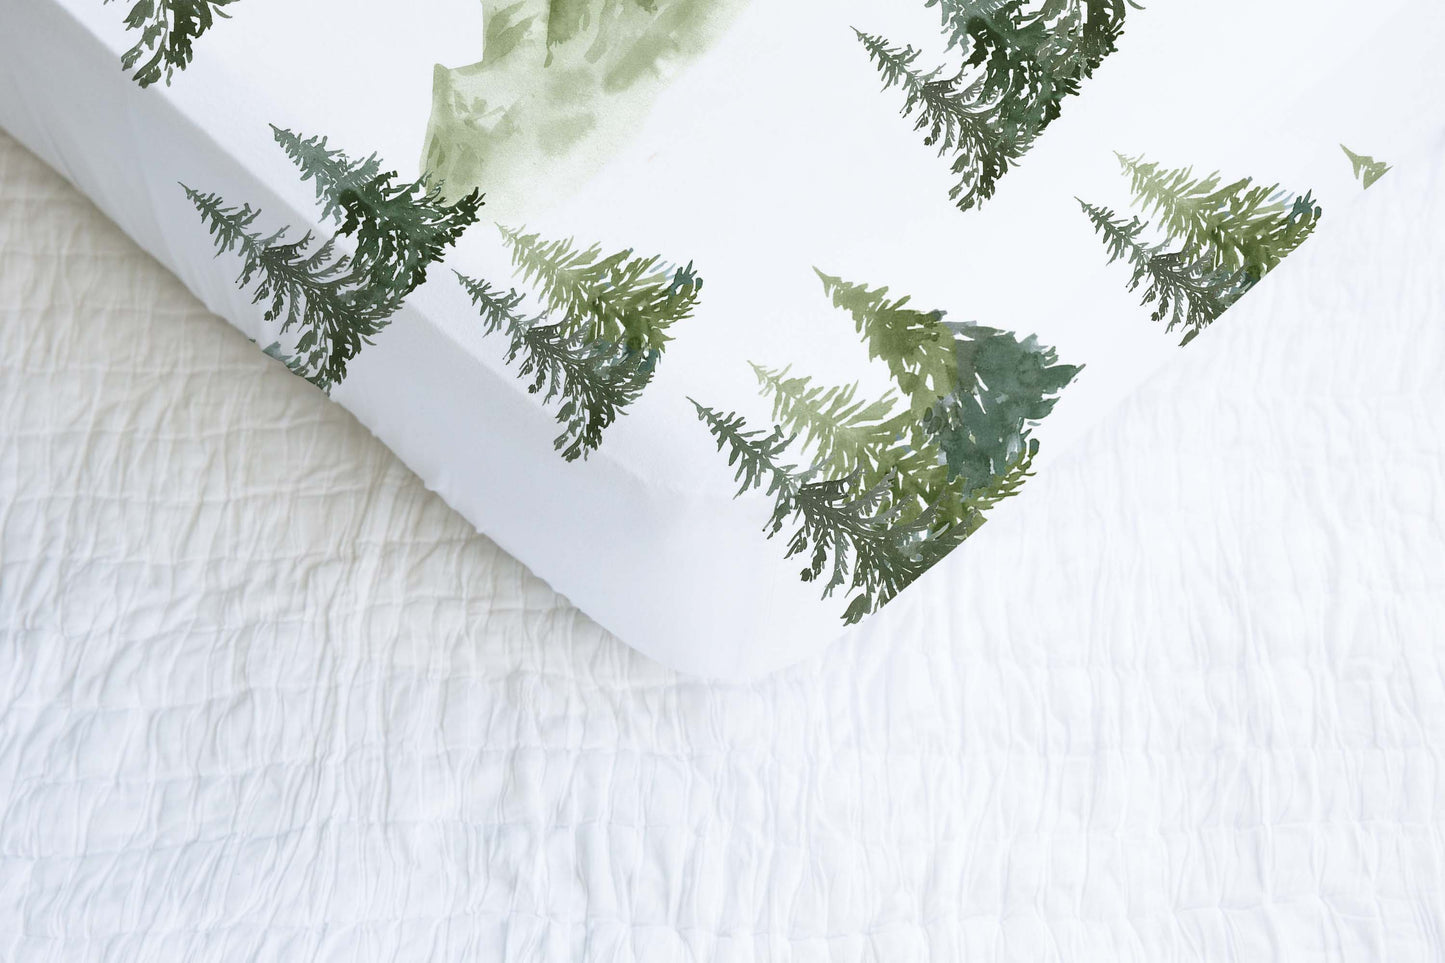 Mountains and Pine Trees Crib Sheet, Forest Nursery Bedding - Enchanted Green